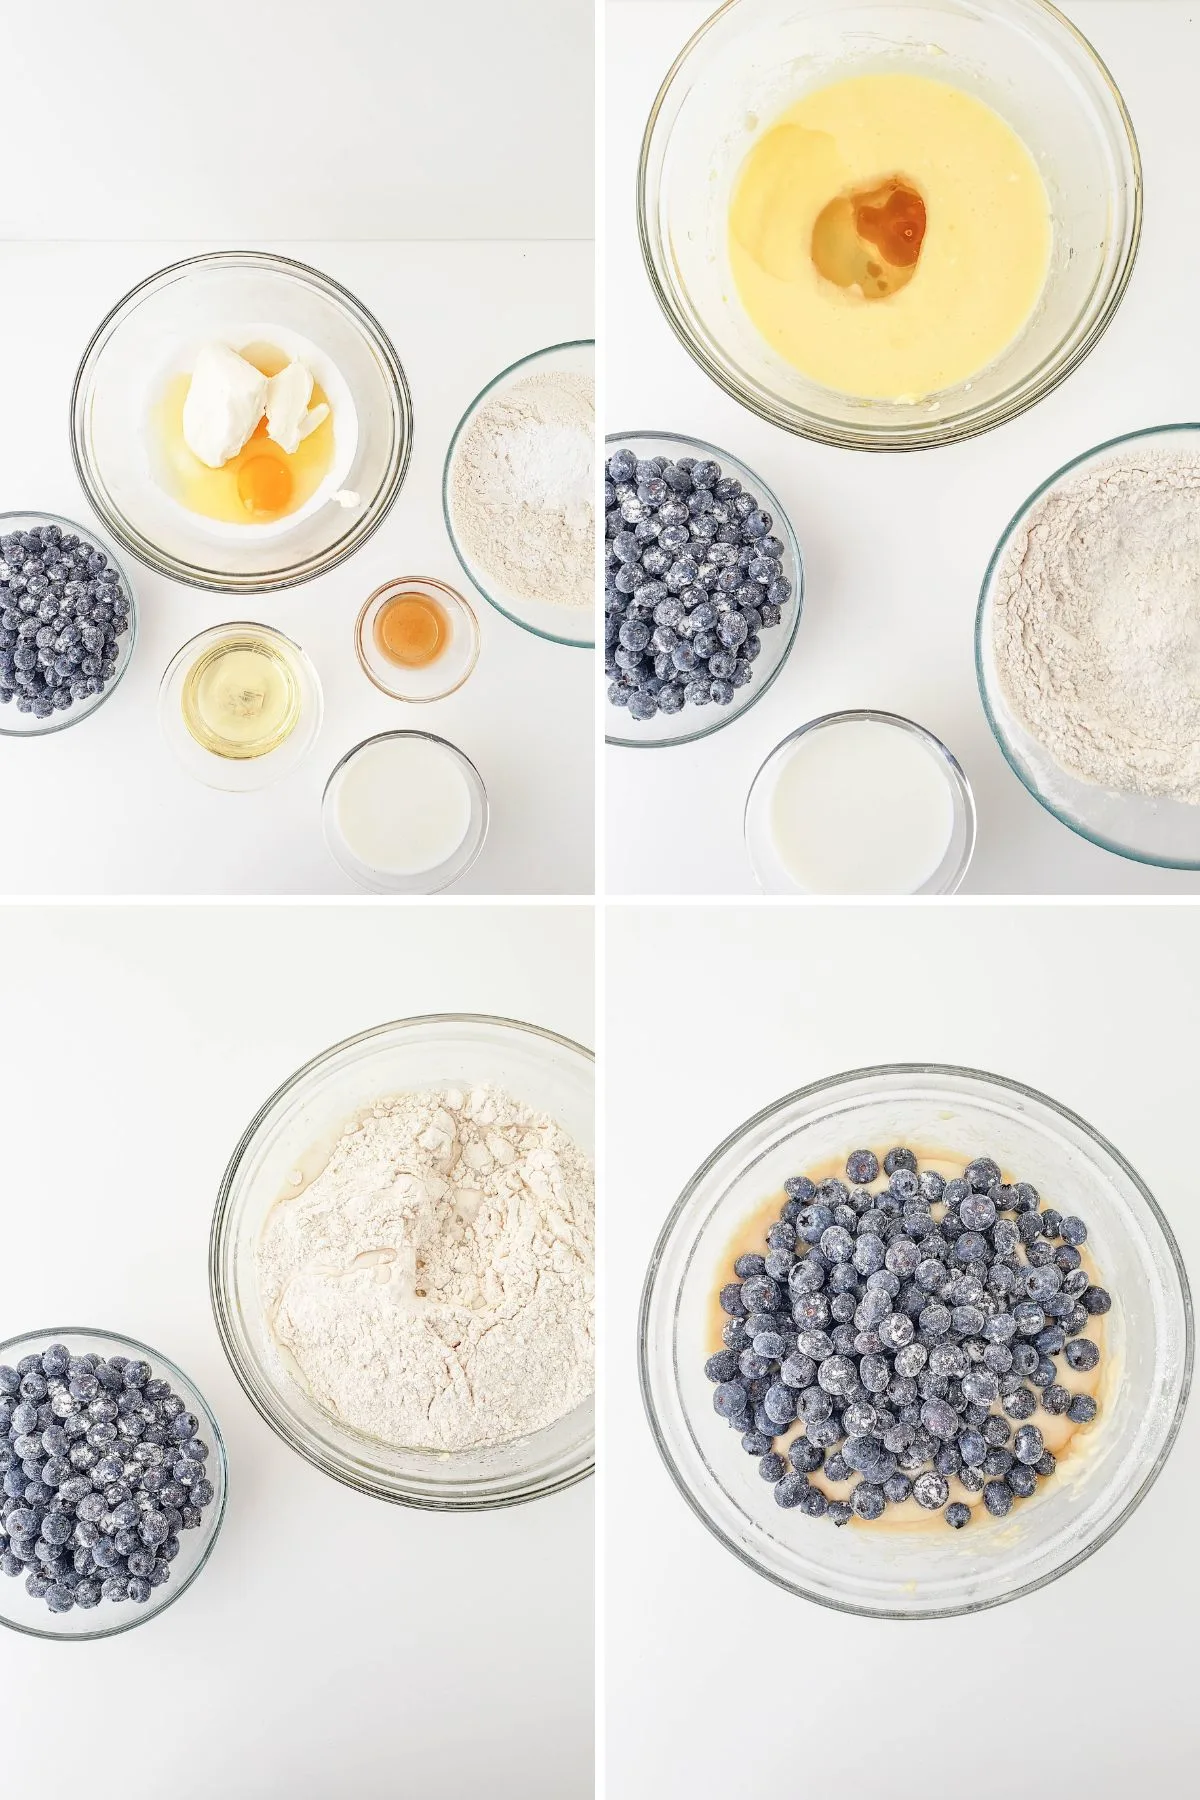 Collage of images showing how to make blueberry lemon muffins.